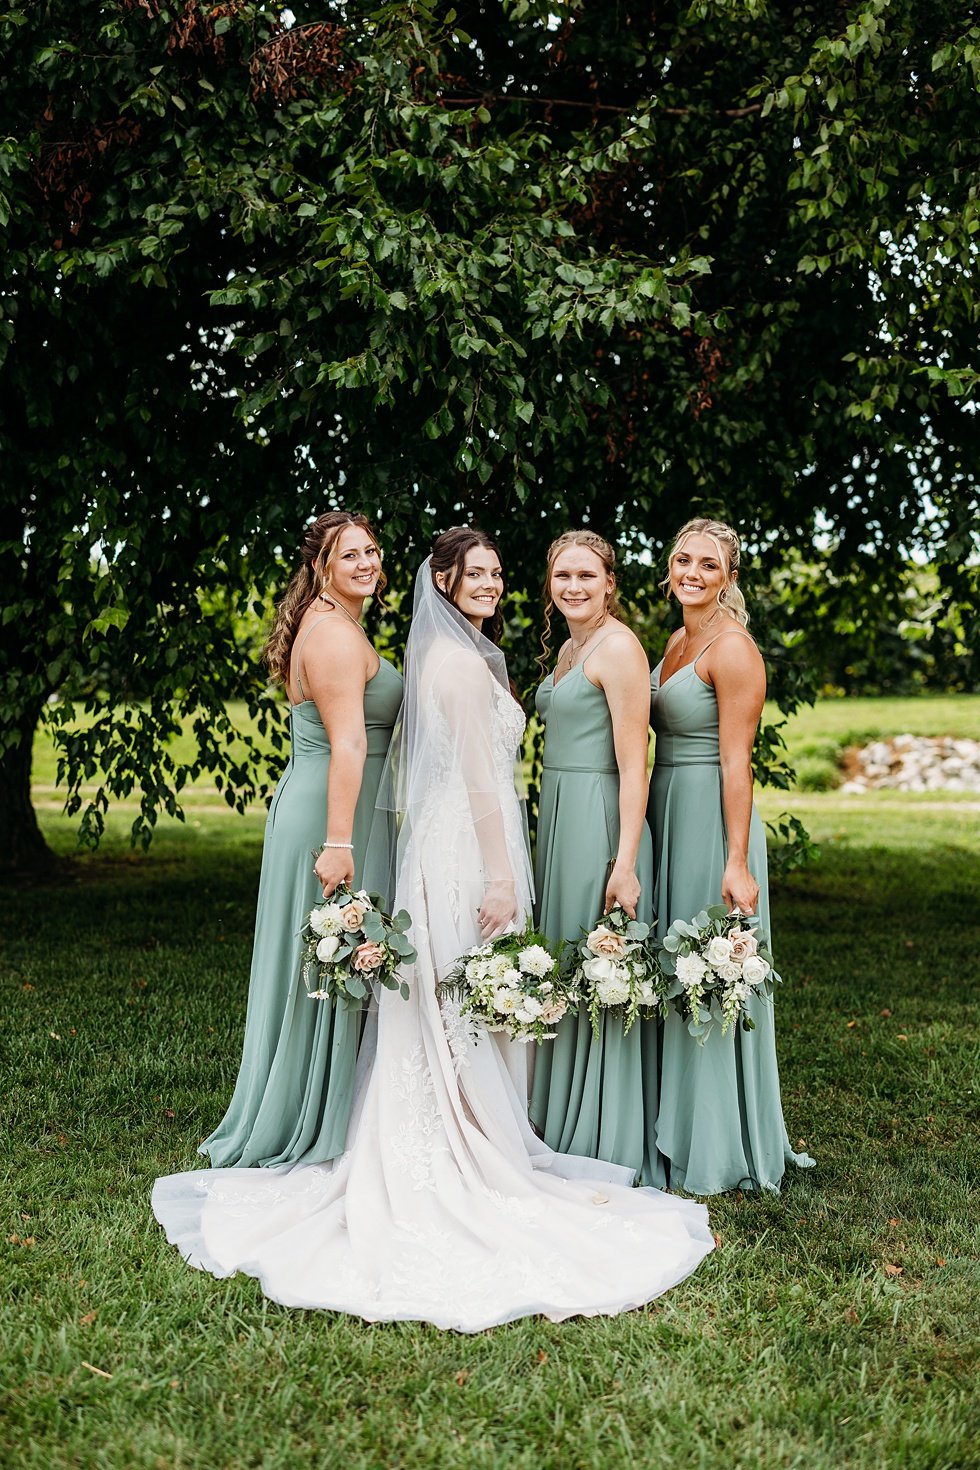  Bride and bridesmaids portraits. Wedding at Huber's Orchard and Winery in Starlight, Indiana. 